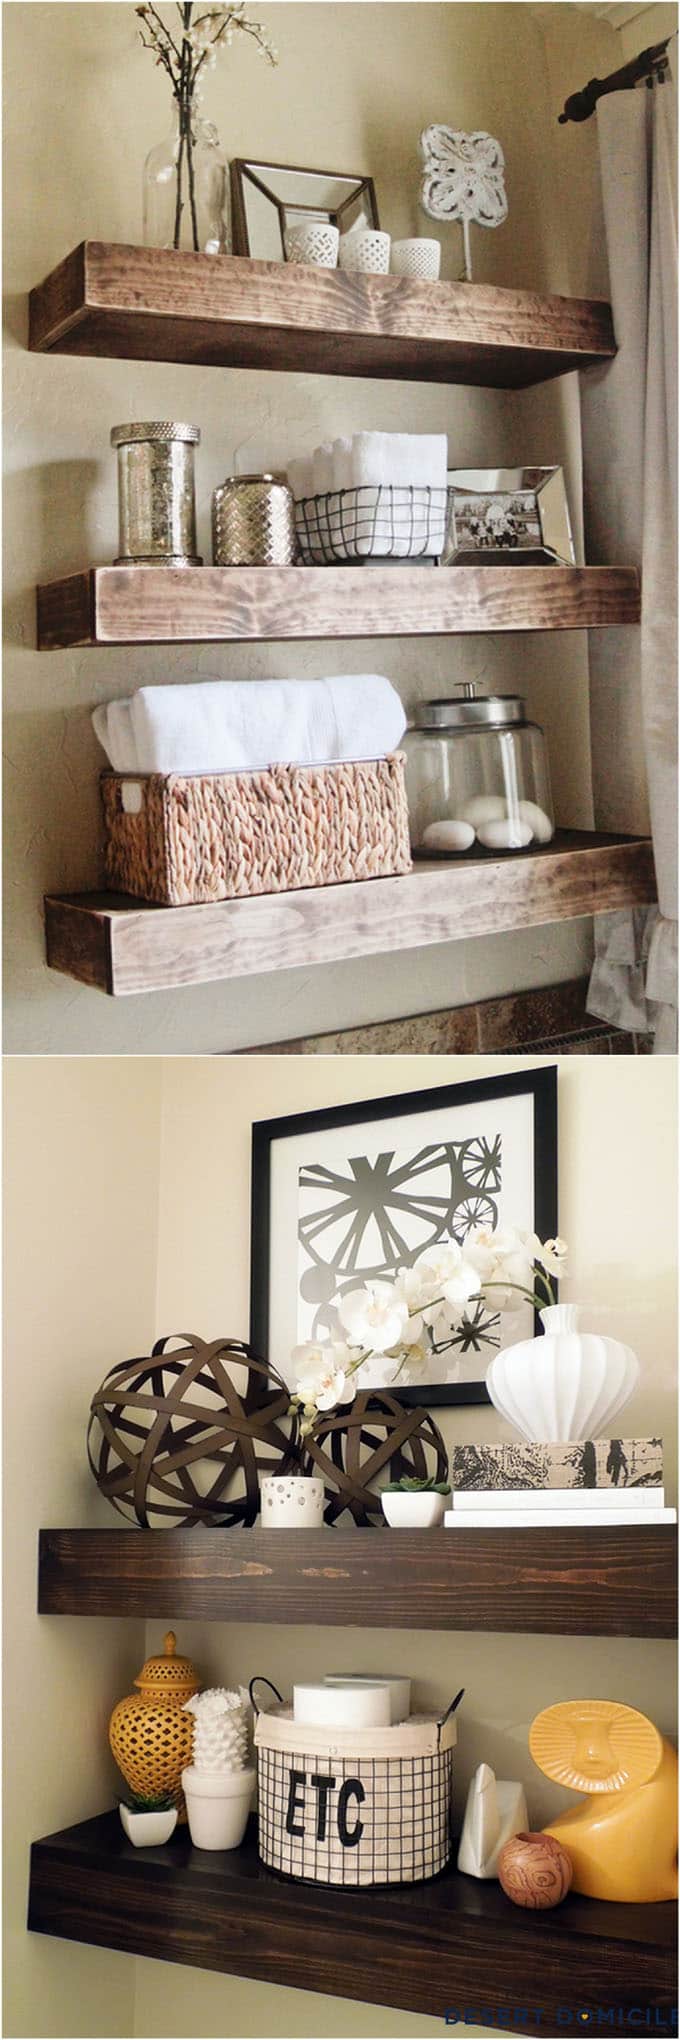 16 easy tutorials on building beautiful floating shelves and wall